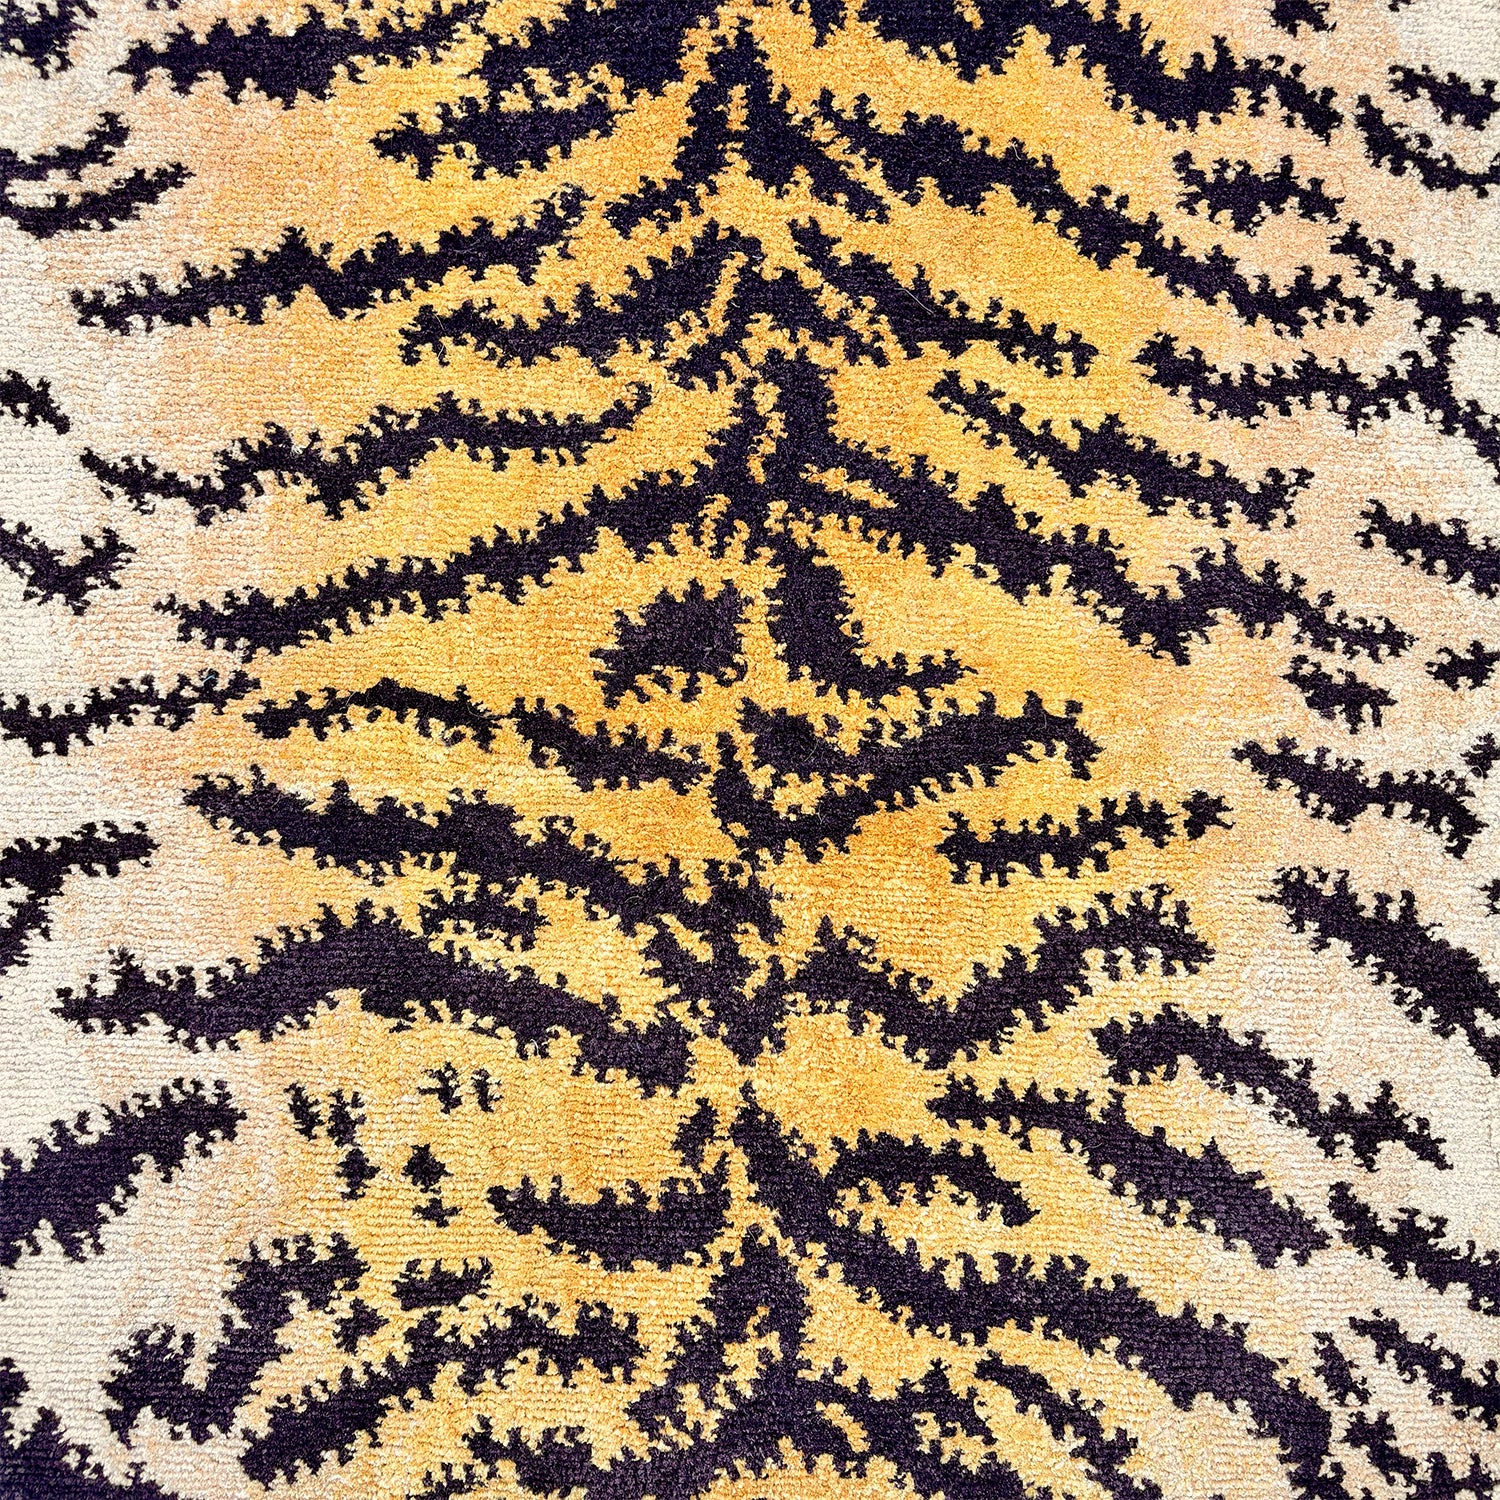 Detail of a wool rug with a large tiger skin pattern in black, white and orange. 